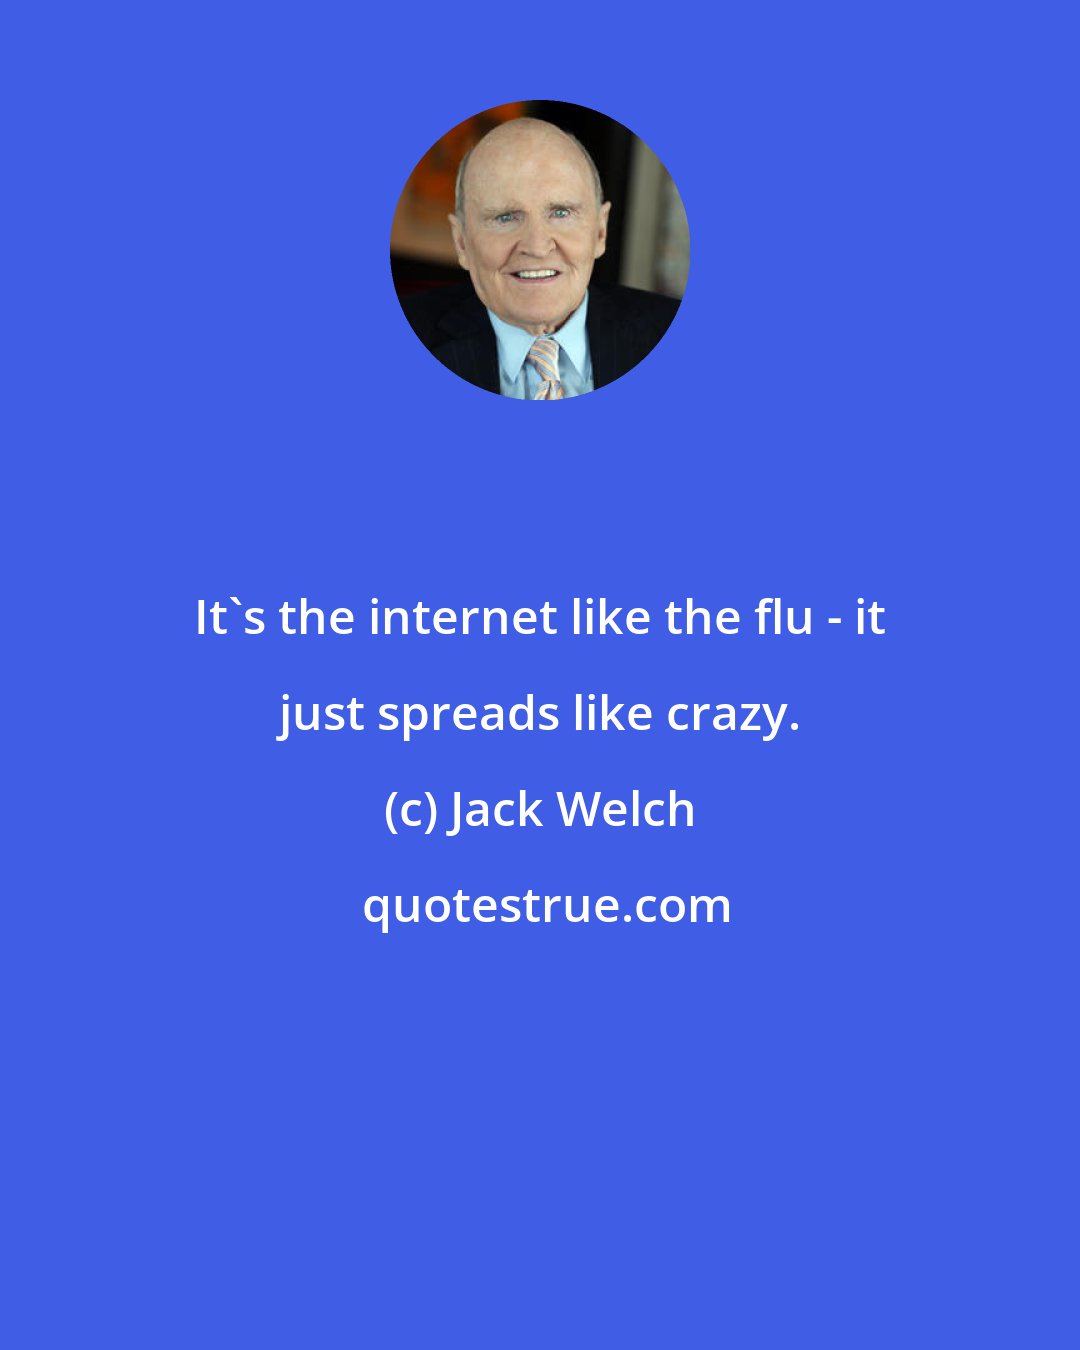 Jack Welch: It's the internet like the flu - it just spreads like crazy.